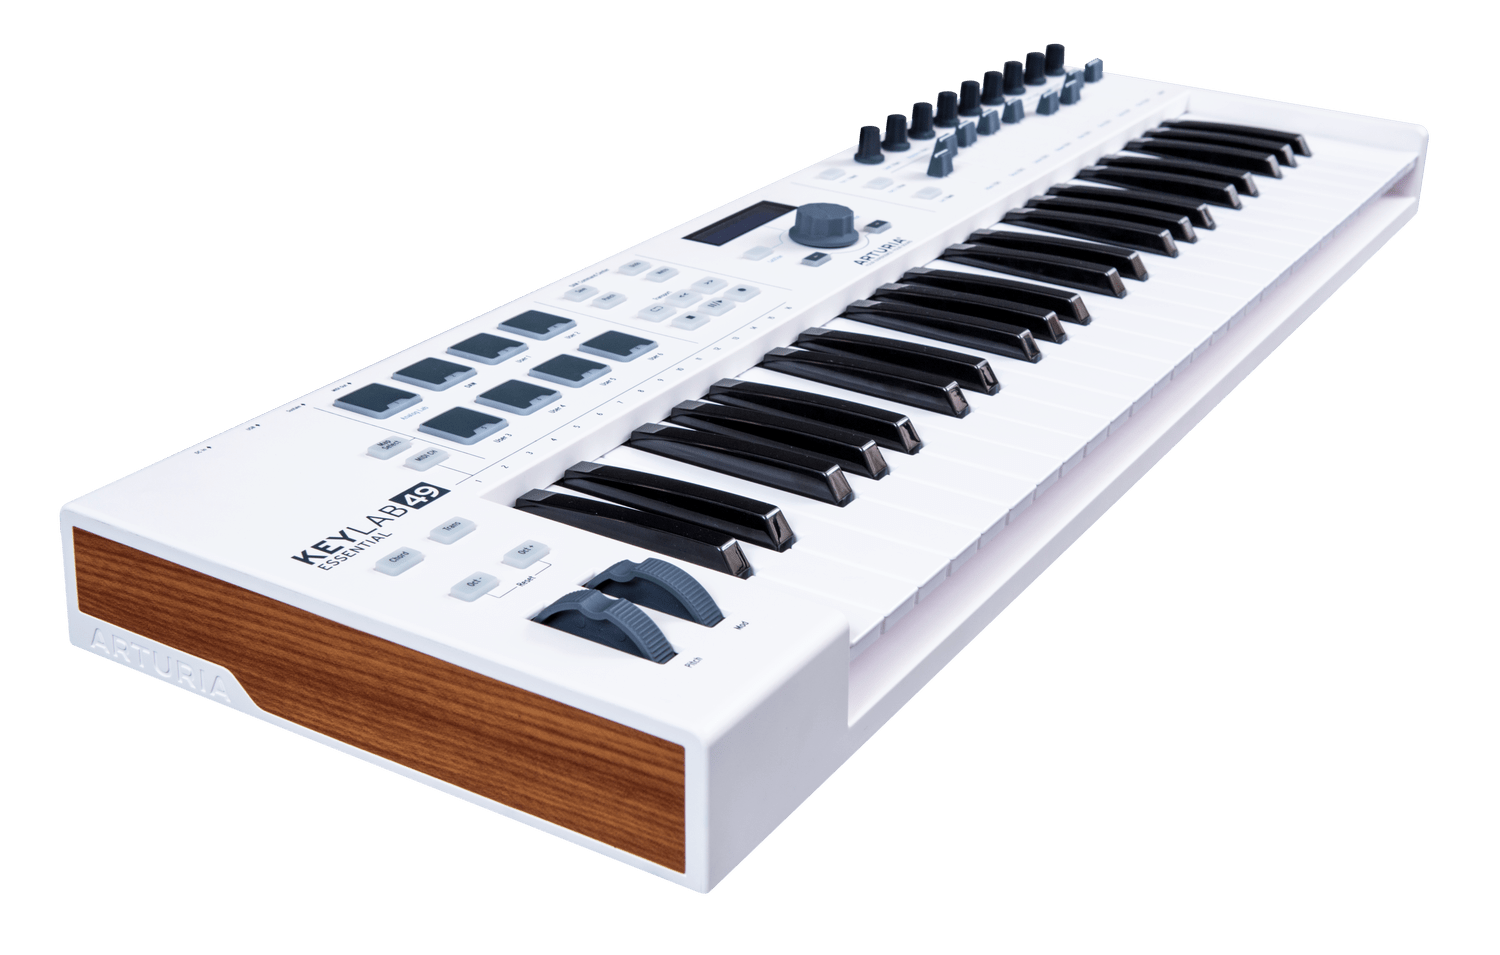 Arturia KEYLAB ESSENTIAL 49 Easy to Use 49 key controller Packed with Features